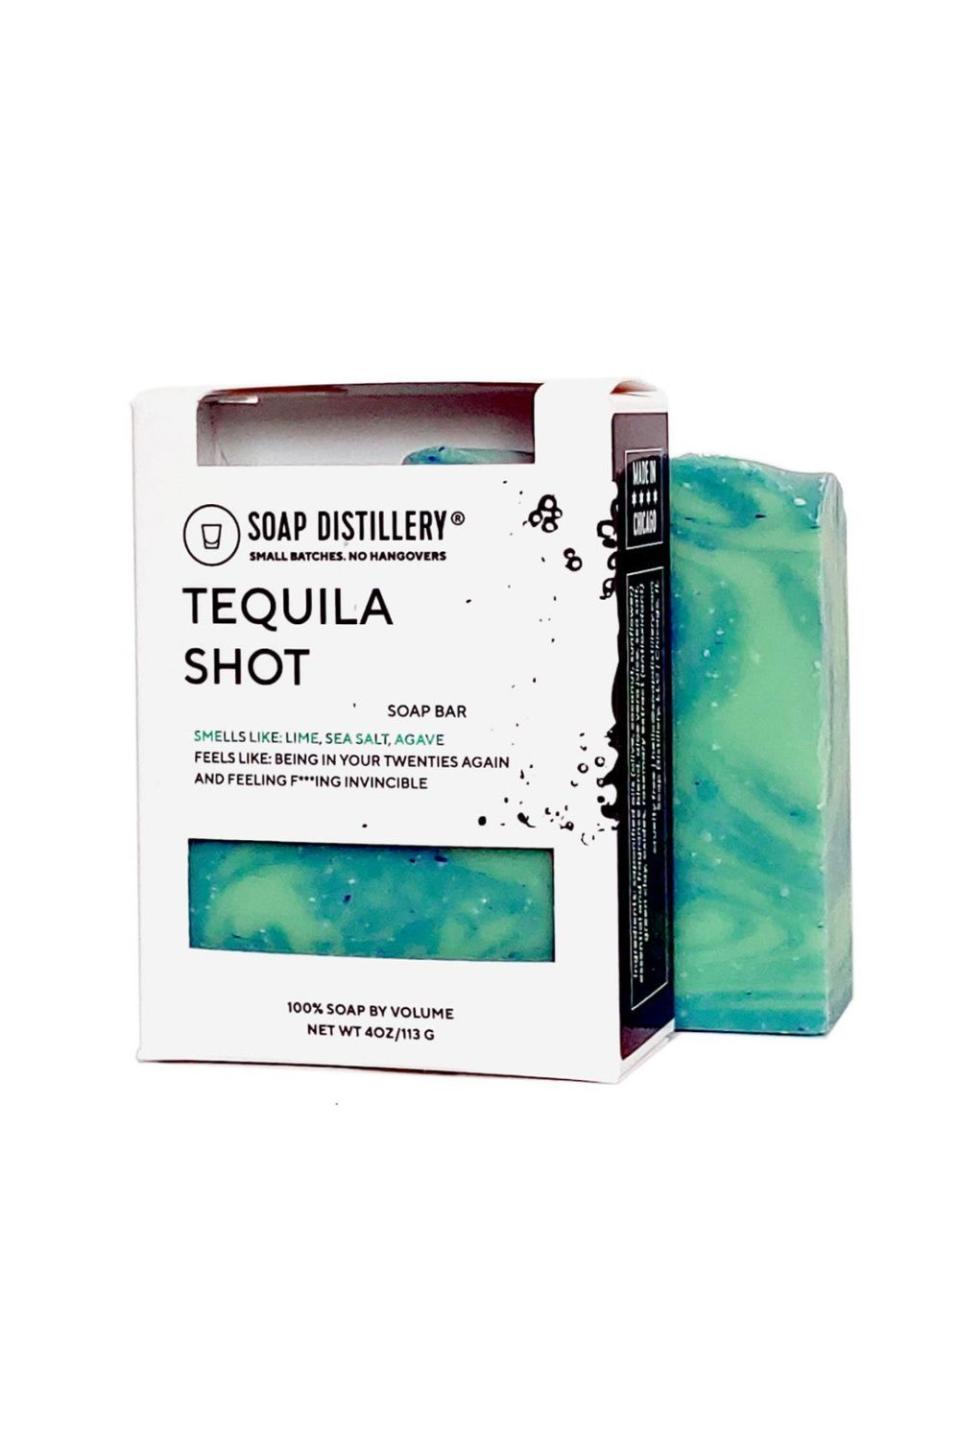 35) Tequila Soap Bar